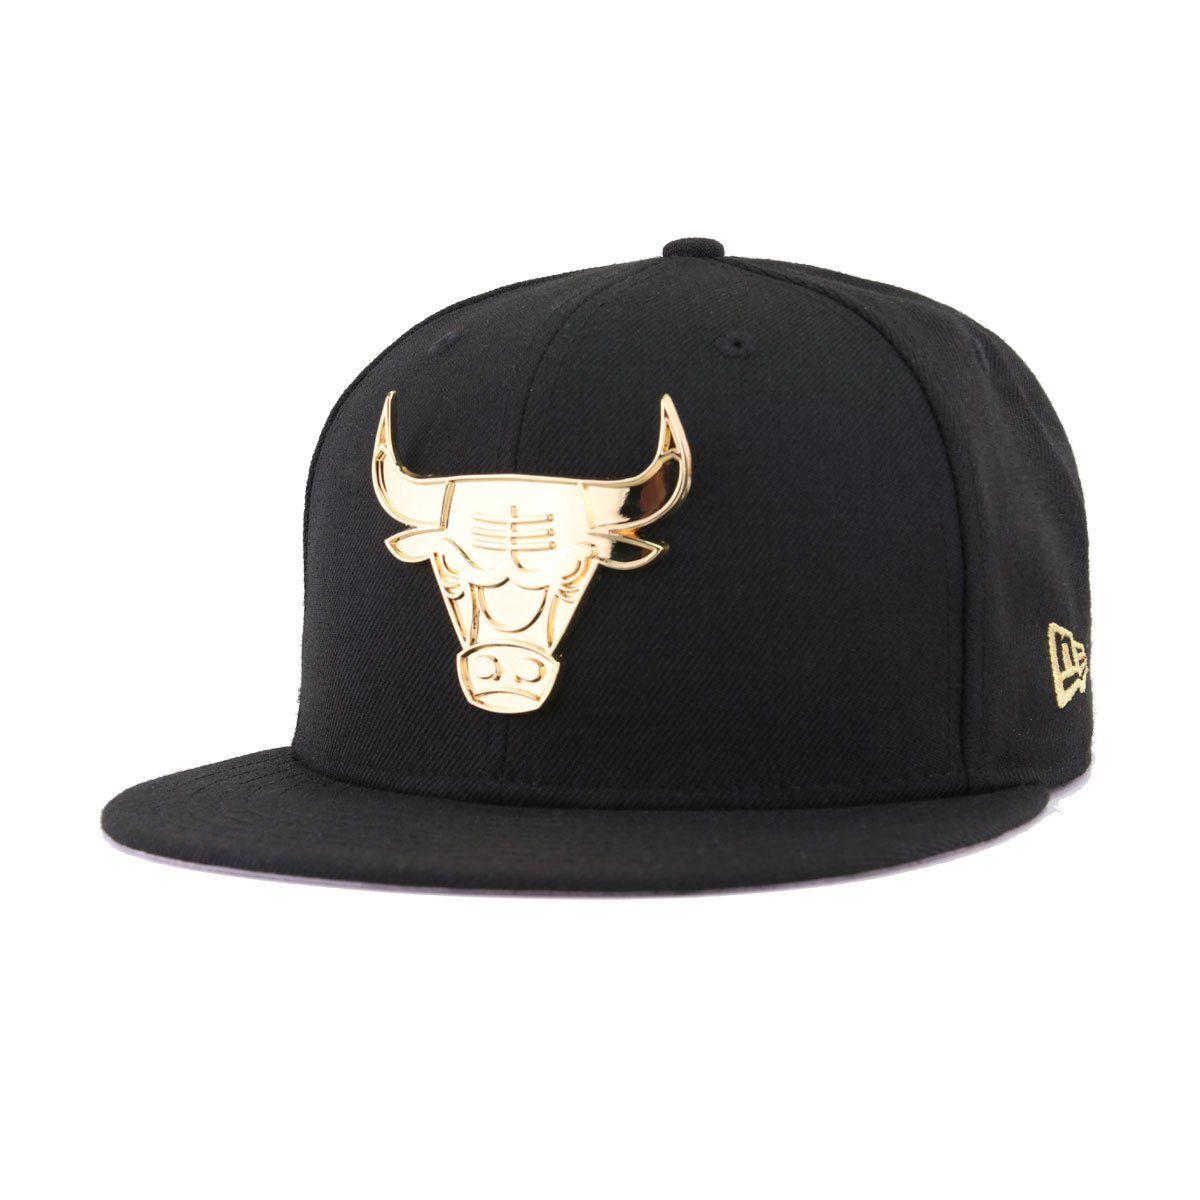 Black and Gold Bull Logo - Chicago Bulls Black Gold Metal Badge New Era 59Fifty Fitted